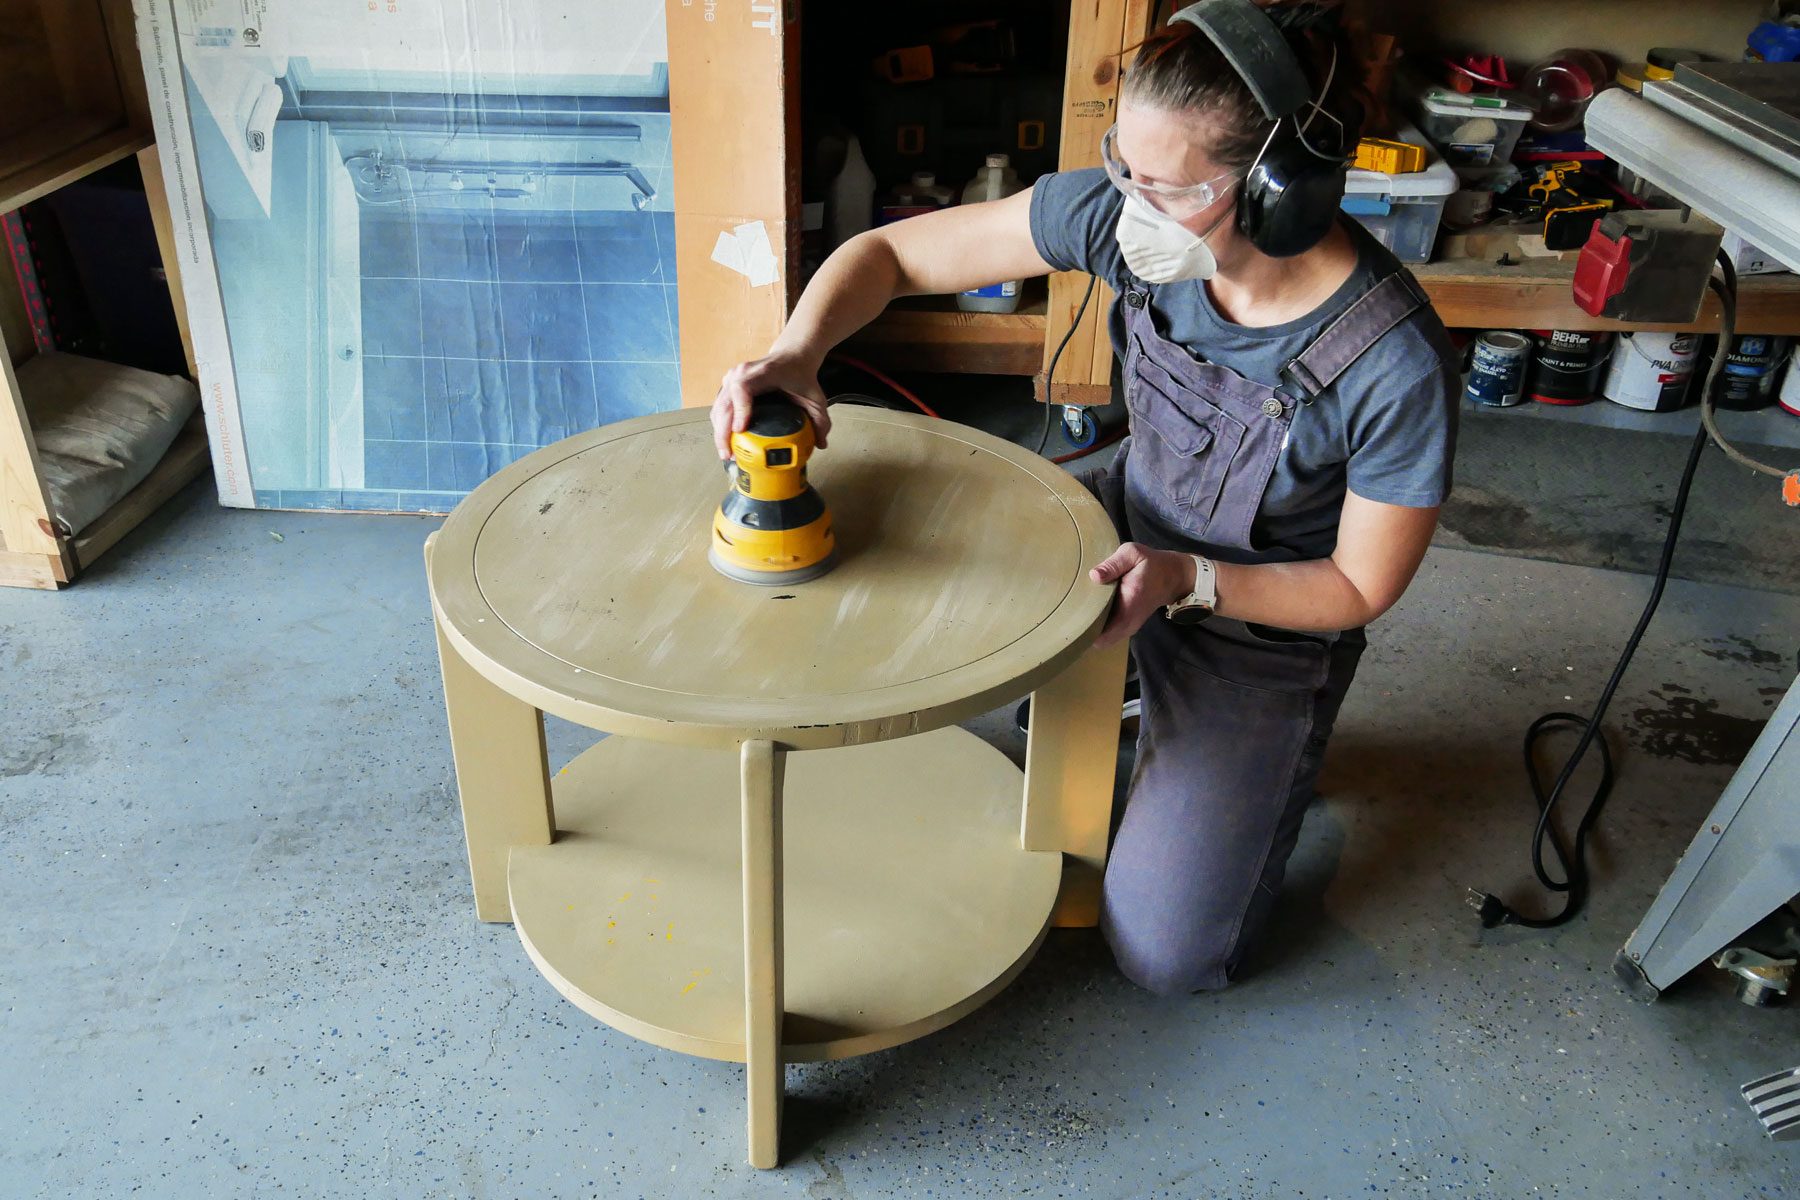 A person working on a table